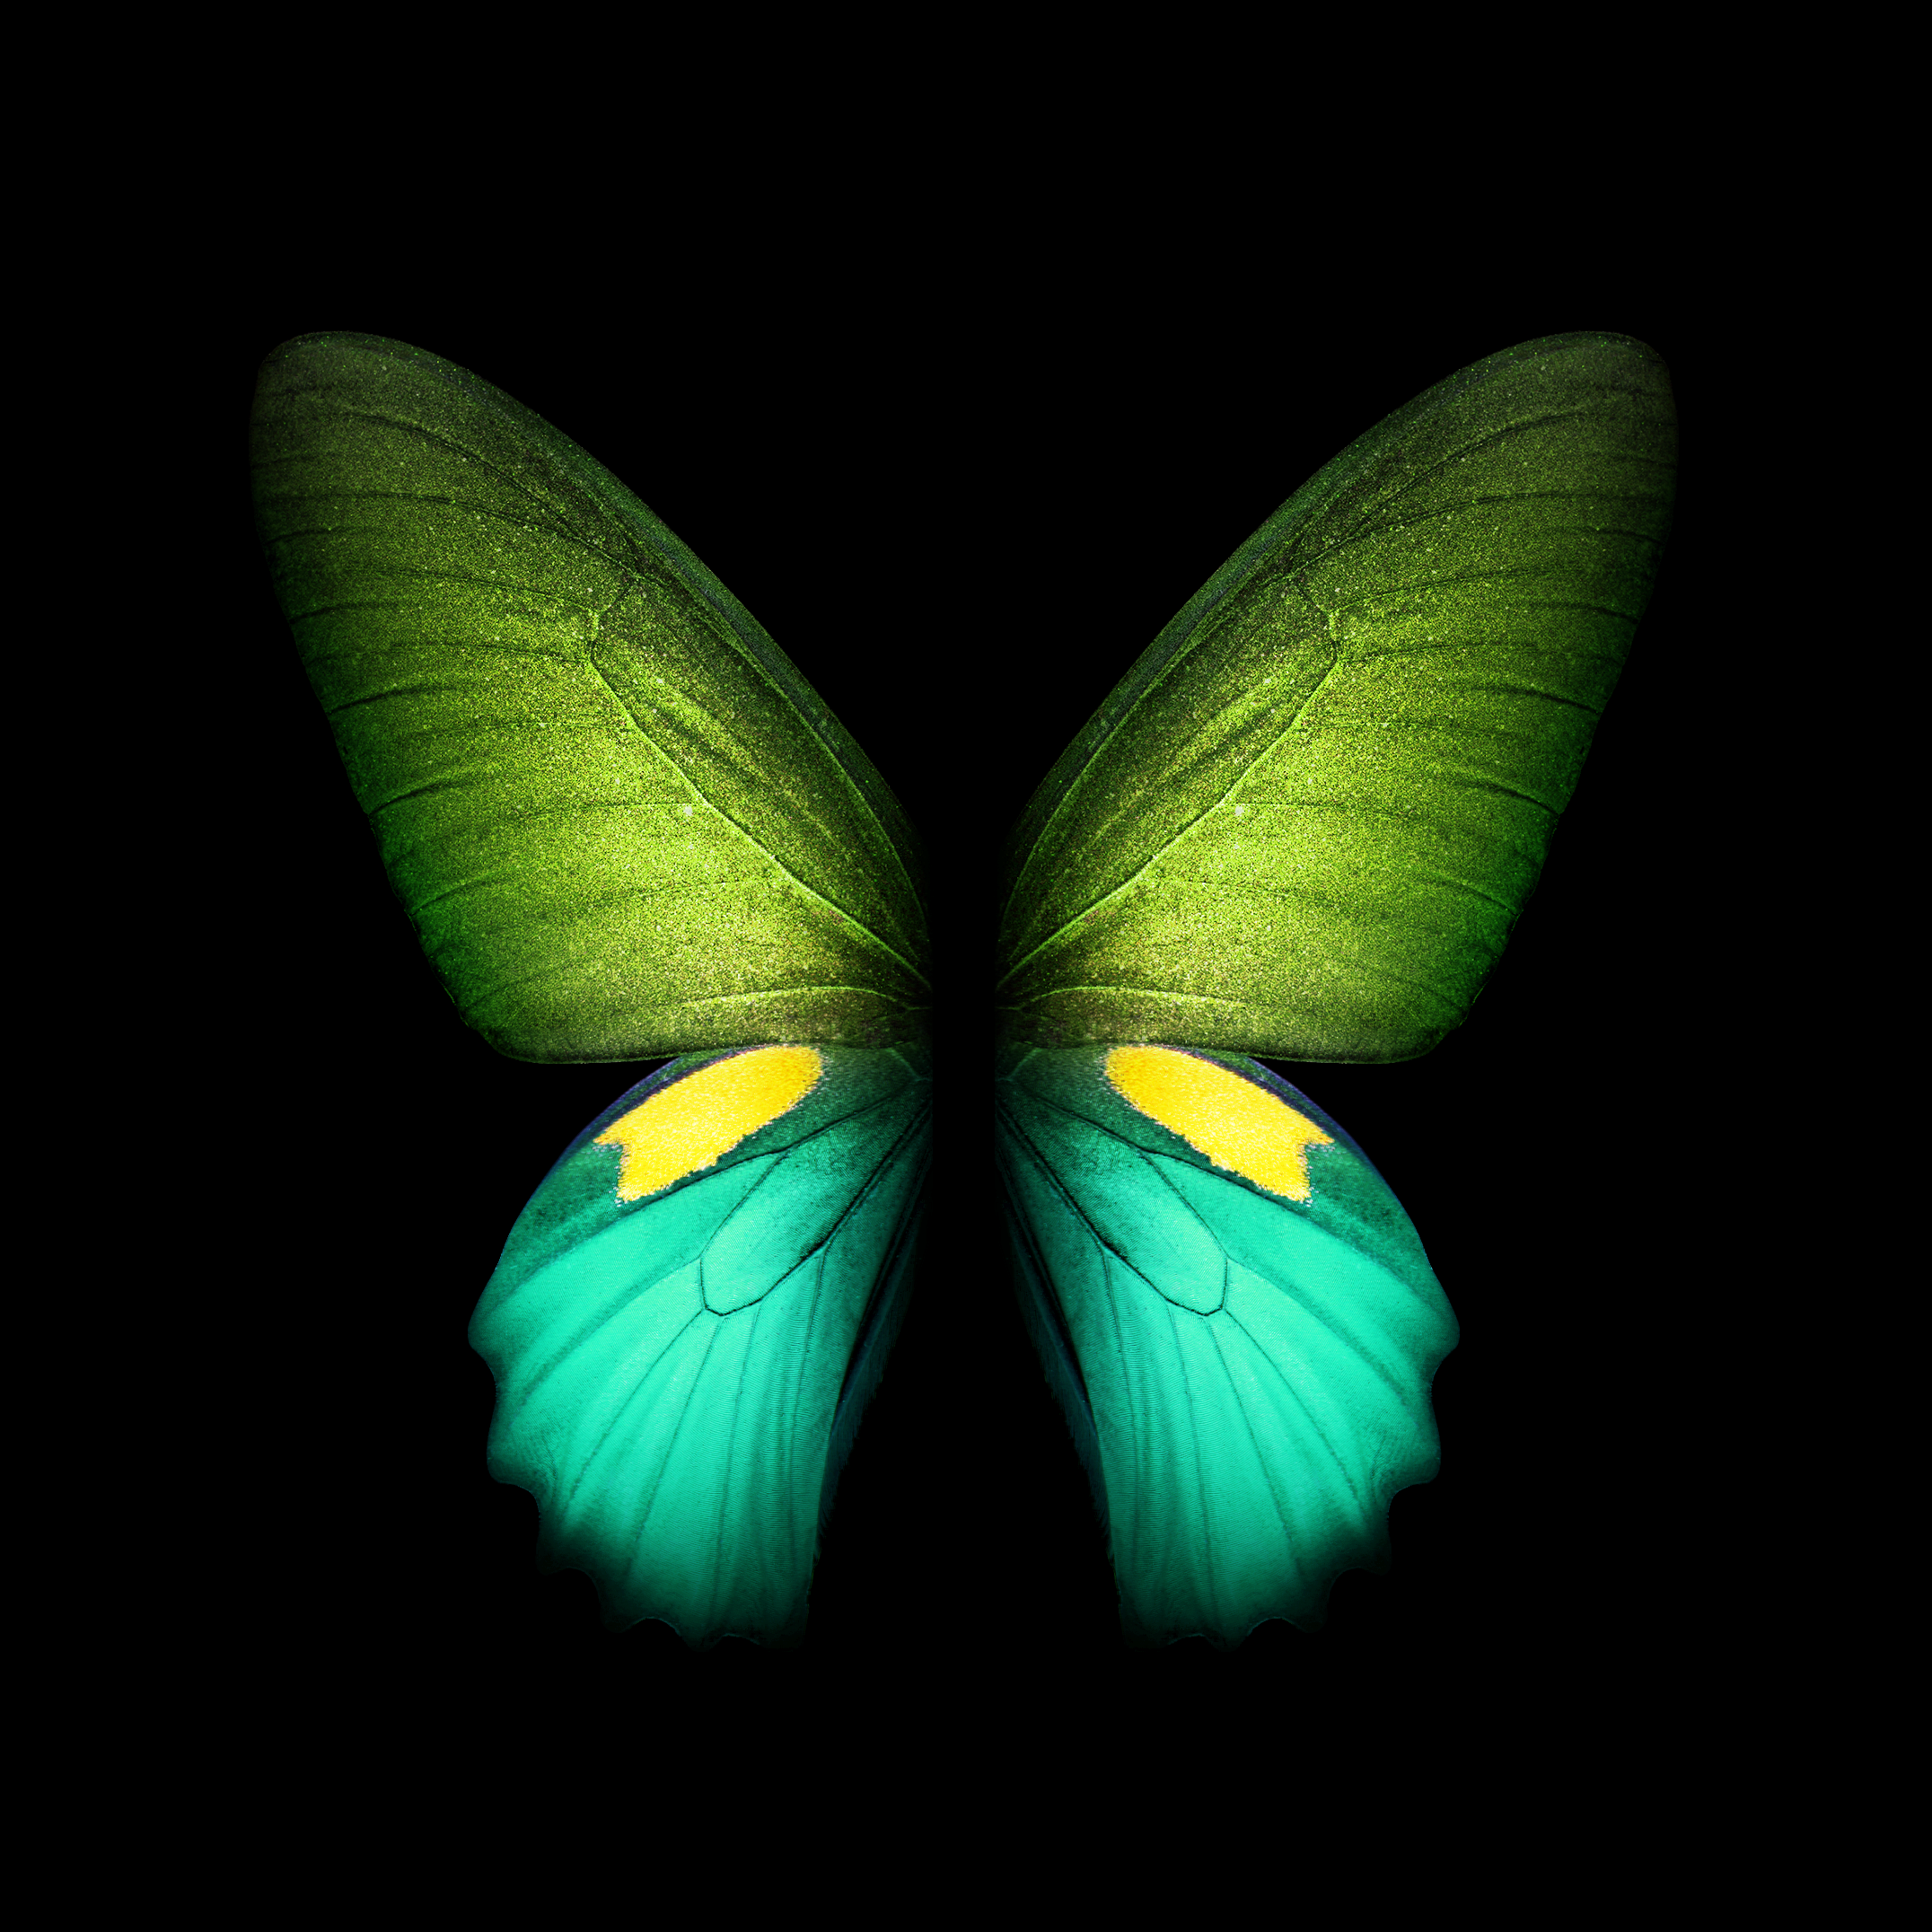 Download Samsung Galaxy Fold wallpaper in full resolution right here